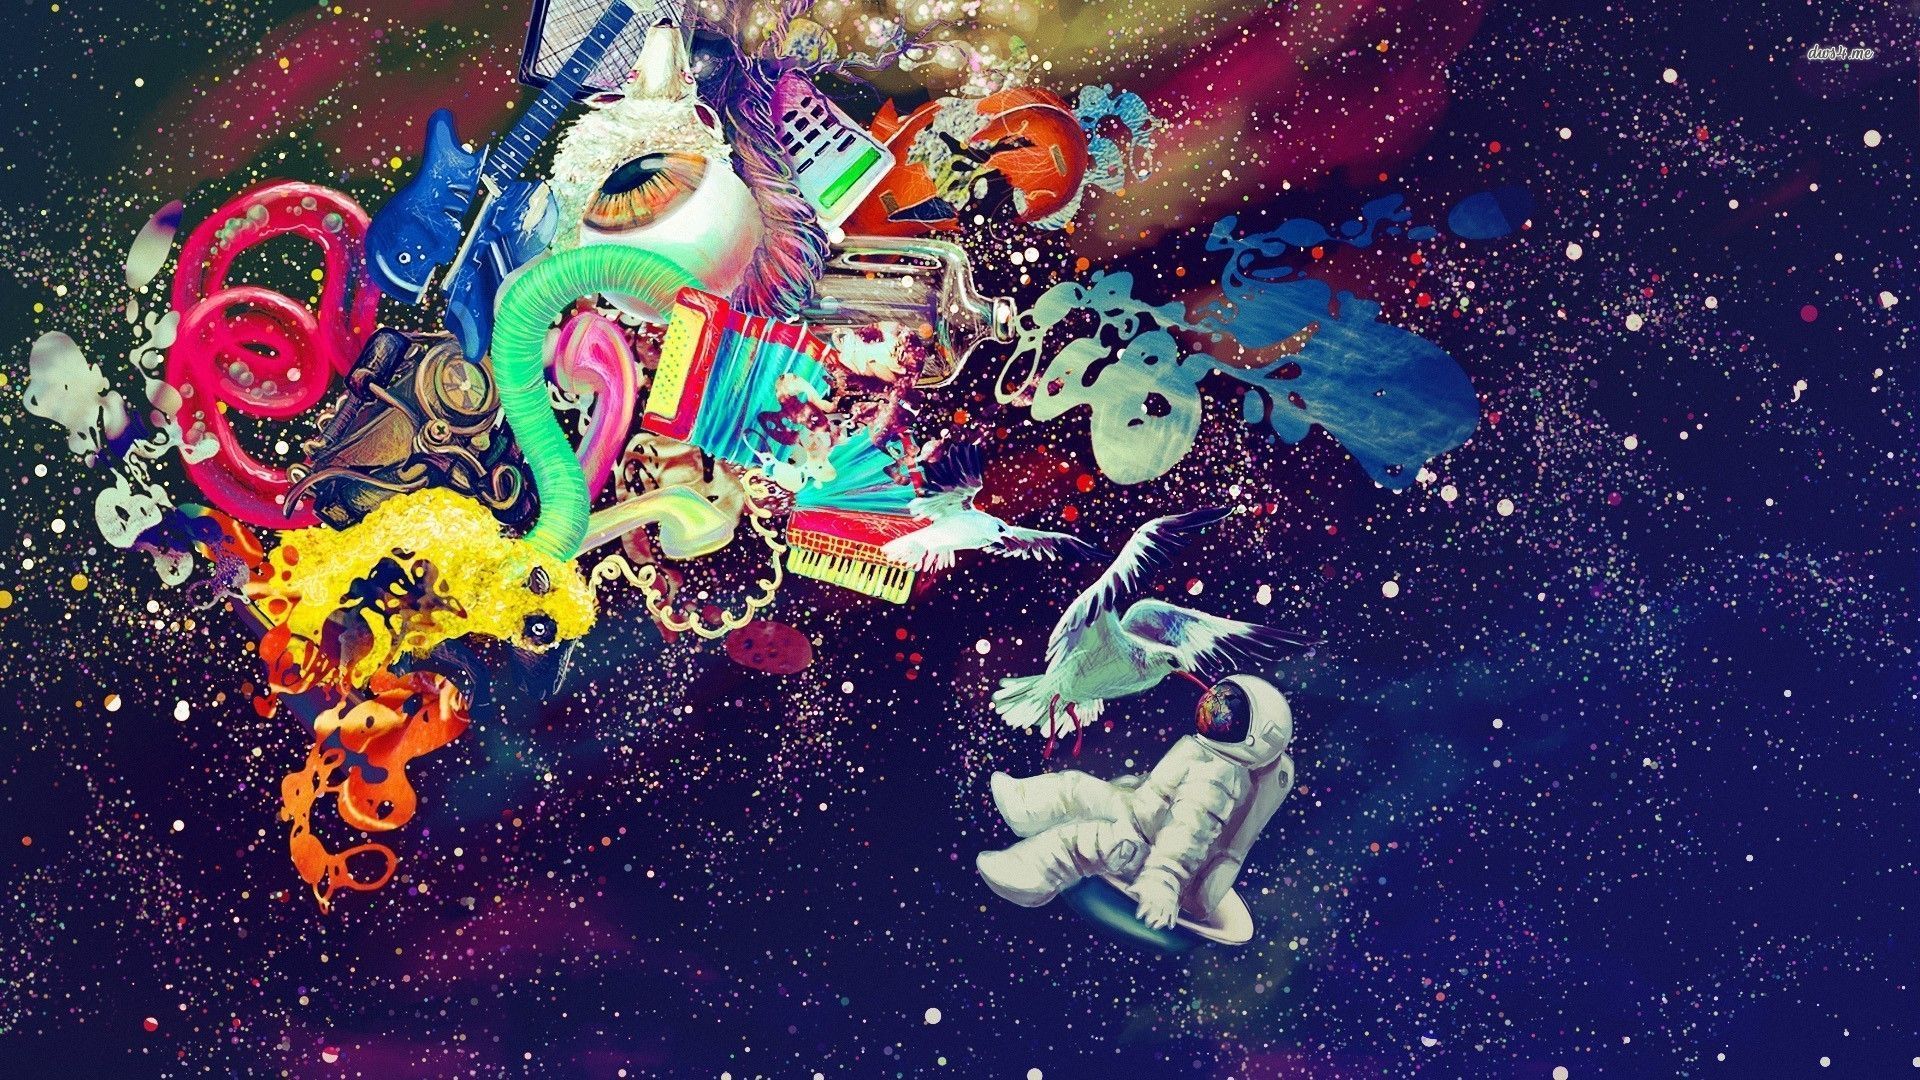 Rainbow Astronaut Wallpaper - Pics about space